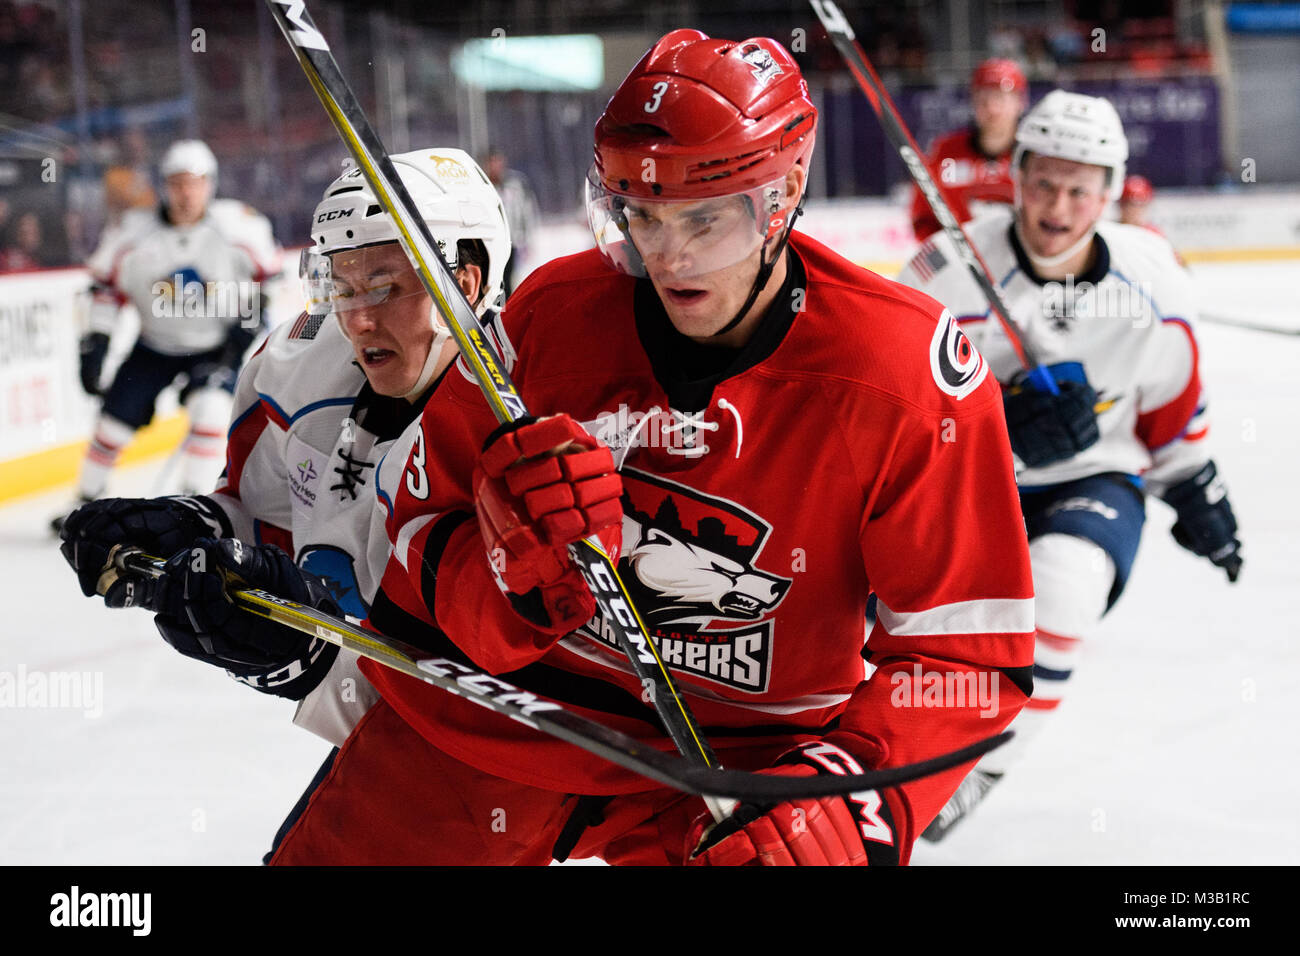 Charlotte Checkers defenseman Roland McKeown (3) during the AHL hockey game between the Springfield Thunderbirds and the Charlotte Checkers on Friday February 9, 2018 at Bojangles Coliseum in Charlotte, NC